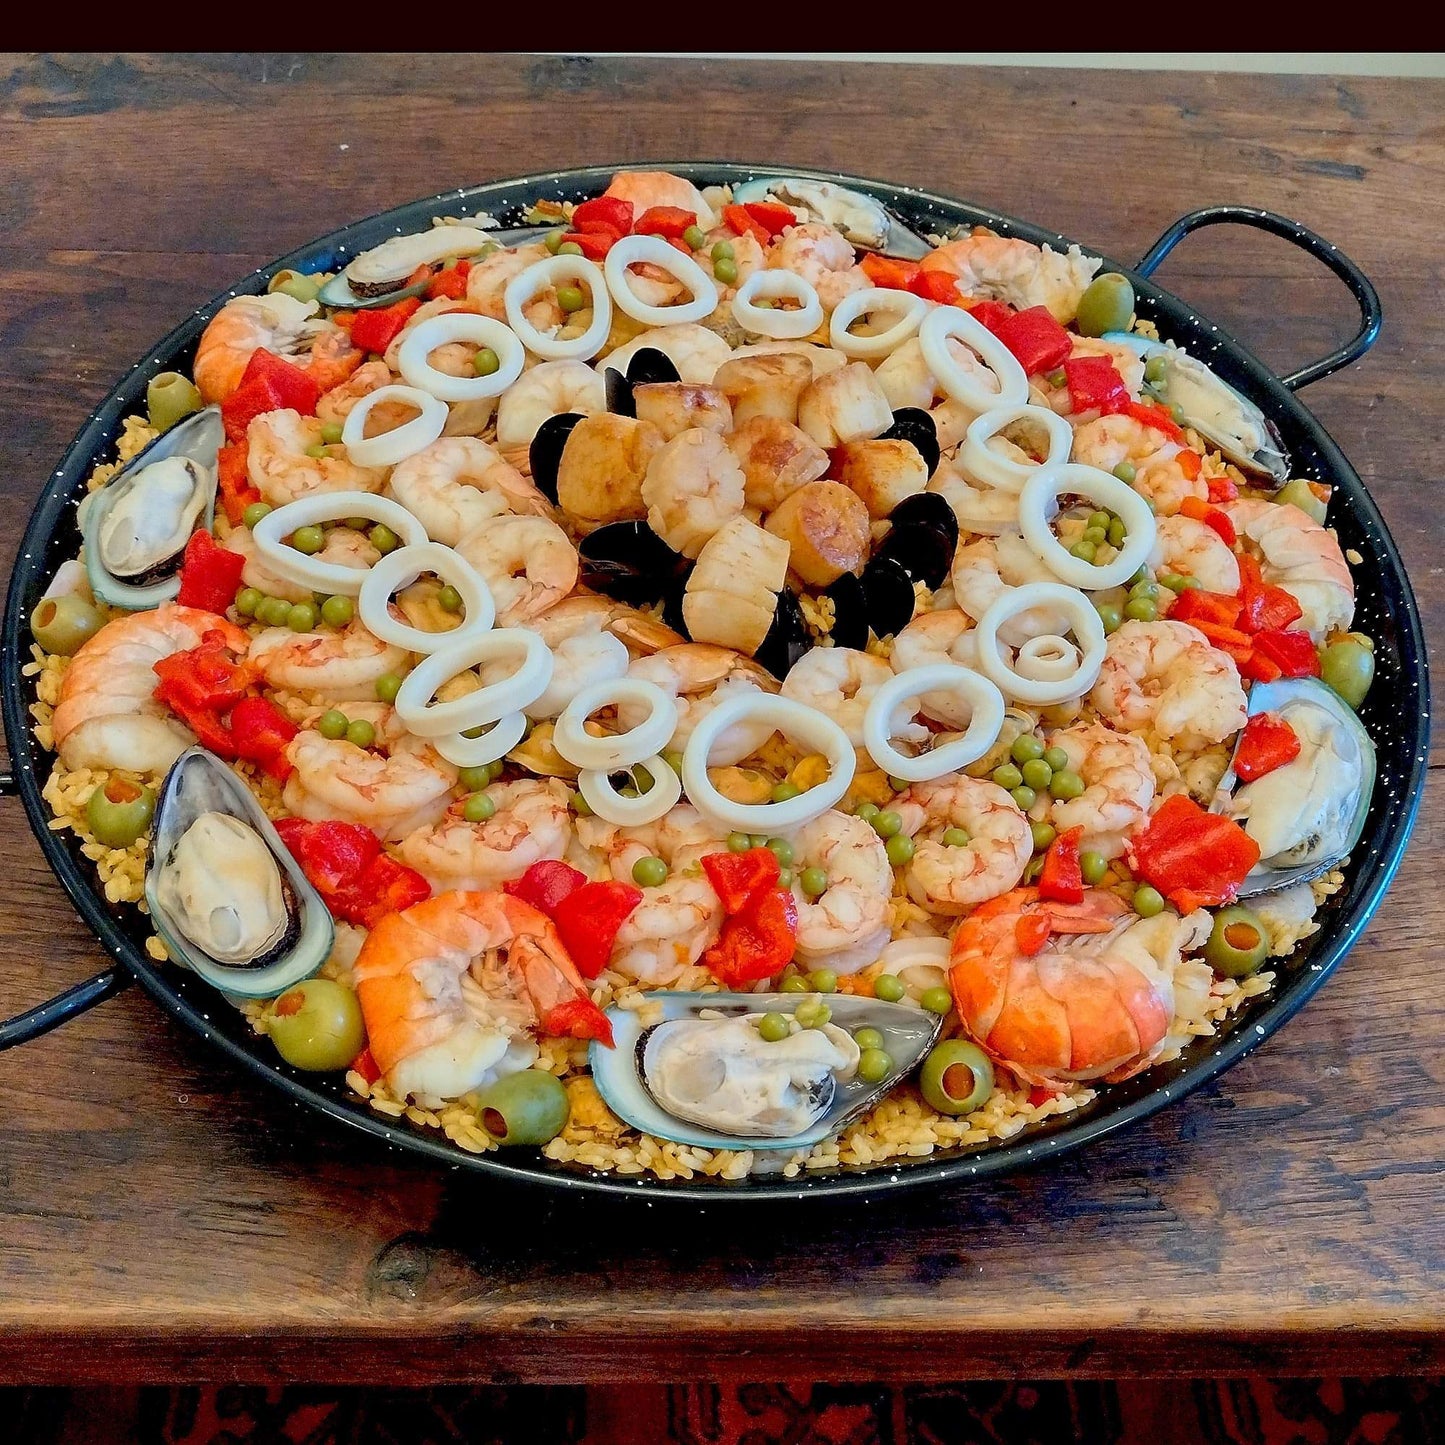 Colossal shrimp, green mussels and scallops seafood paella for 12 guests.